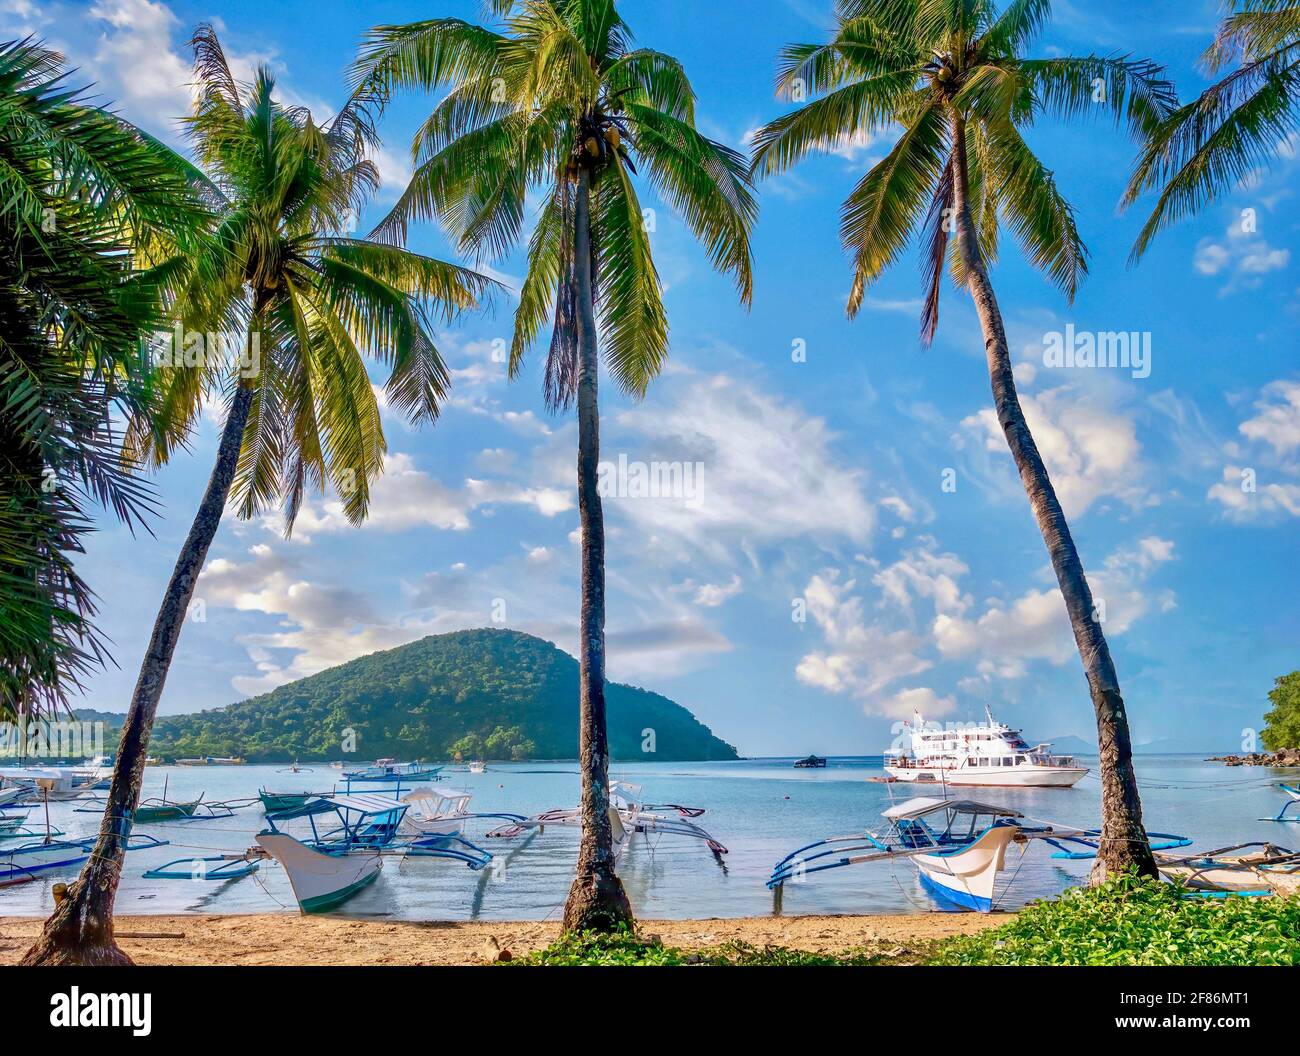 A picturesque tropical cove in the Philippines, with tall coconut palm trees, turquoise water, and traditional wooden outrigger boats known as bancas, Stock Photo